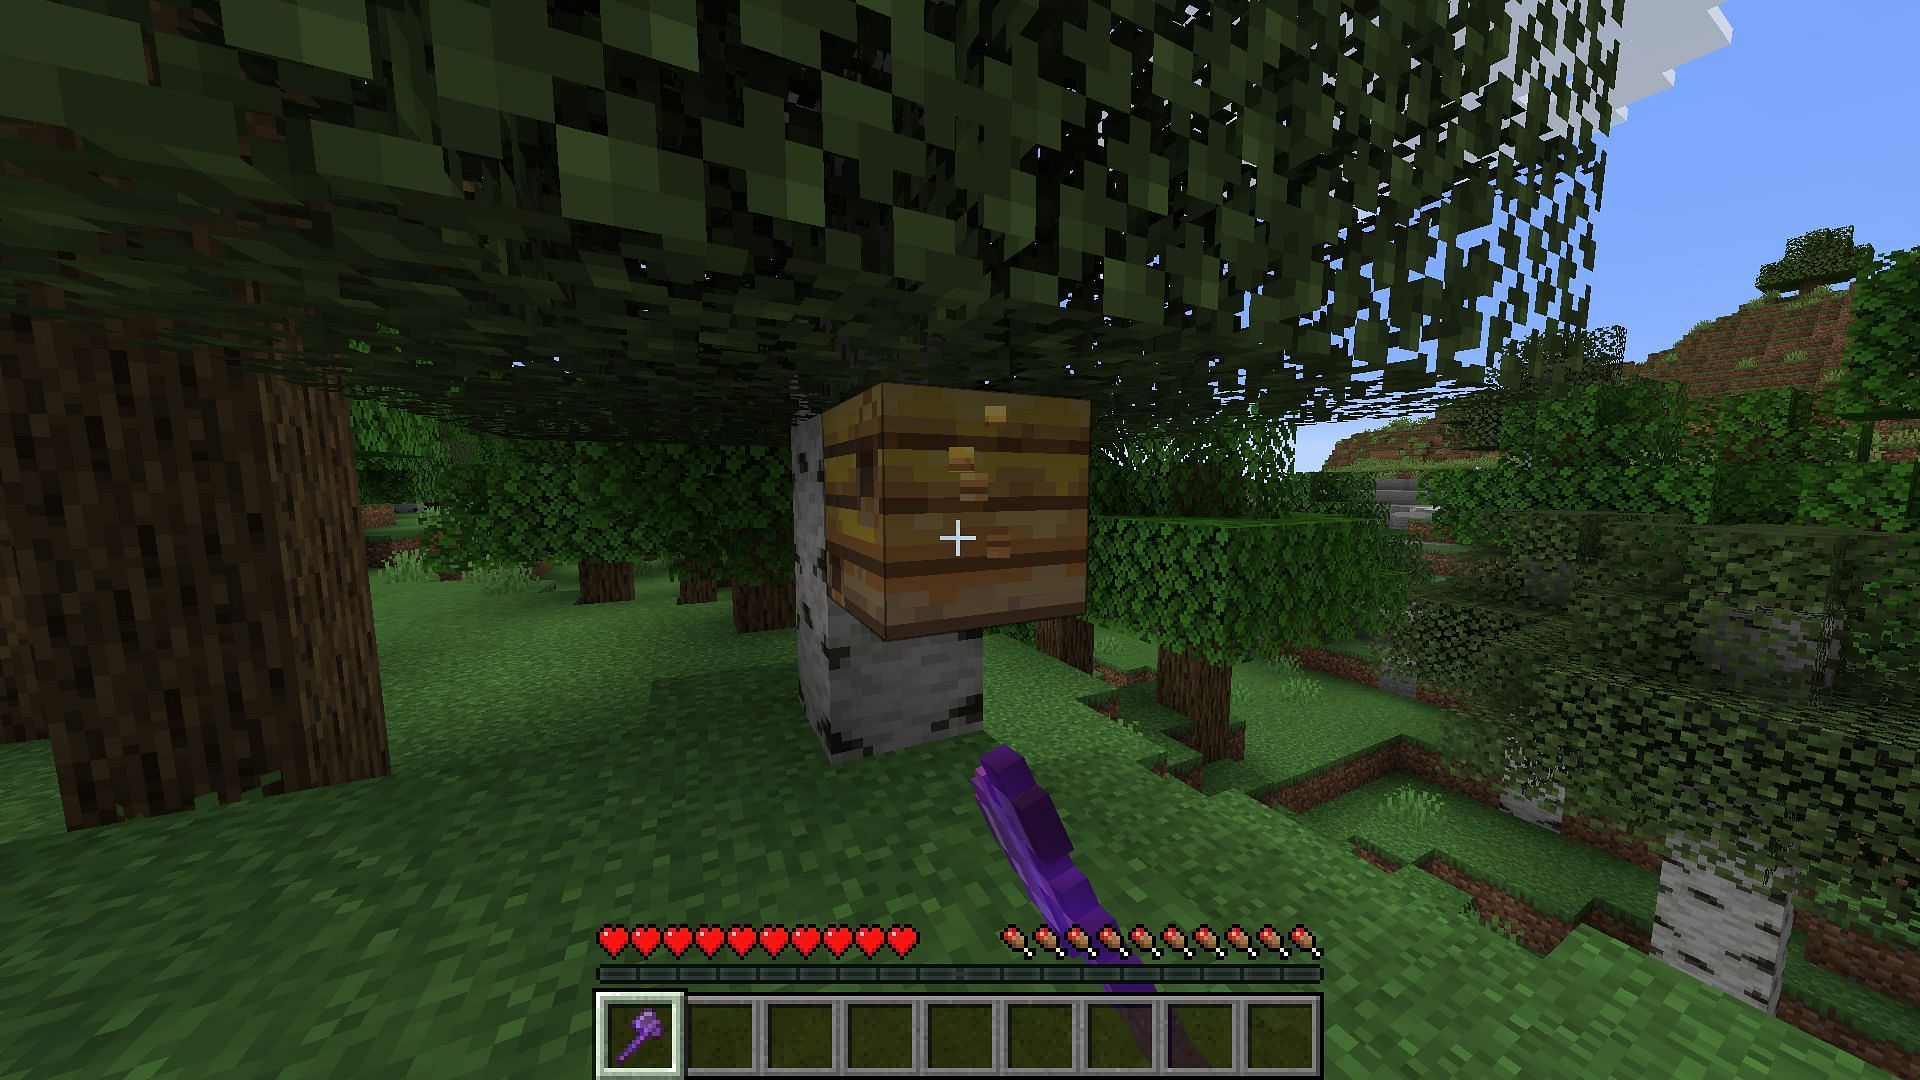 Silk Touch can be used to collect both bees and their nests at once in Minecraft (Image via Mojang)